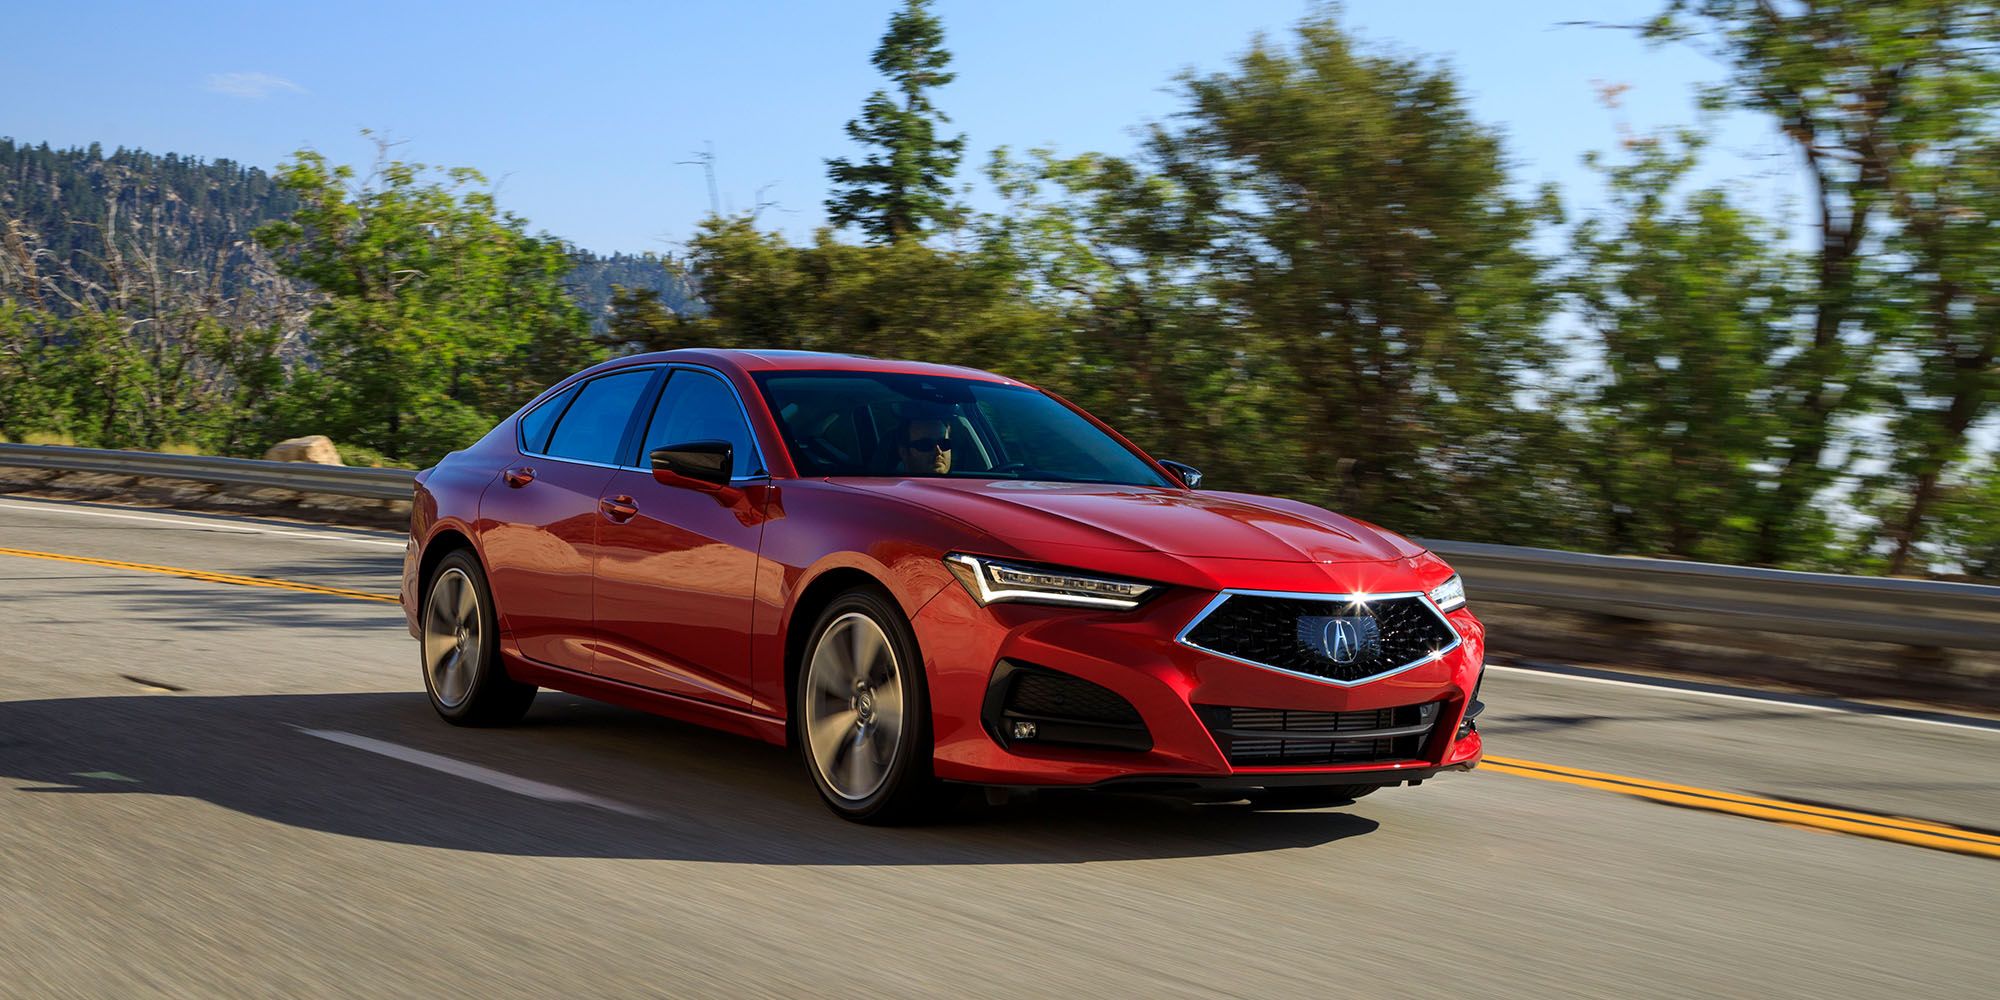 The front of a red TLX Advance